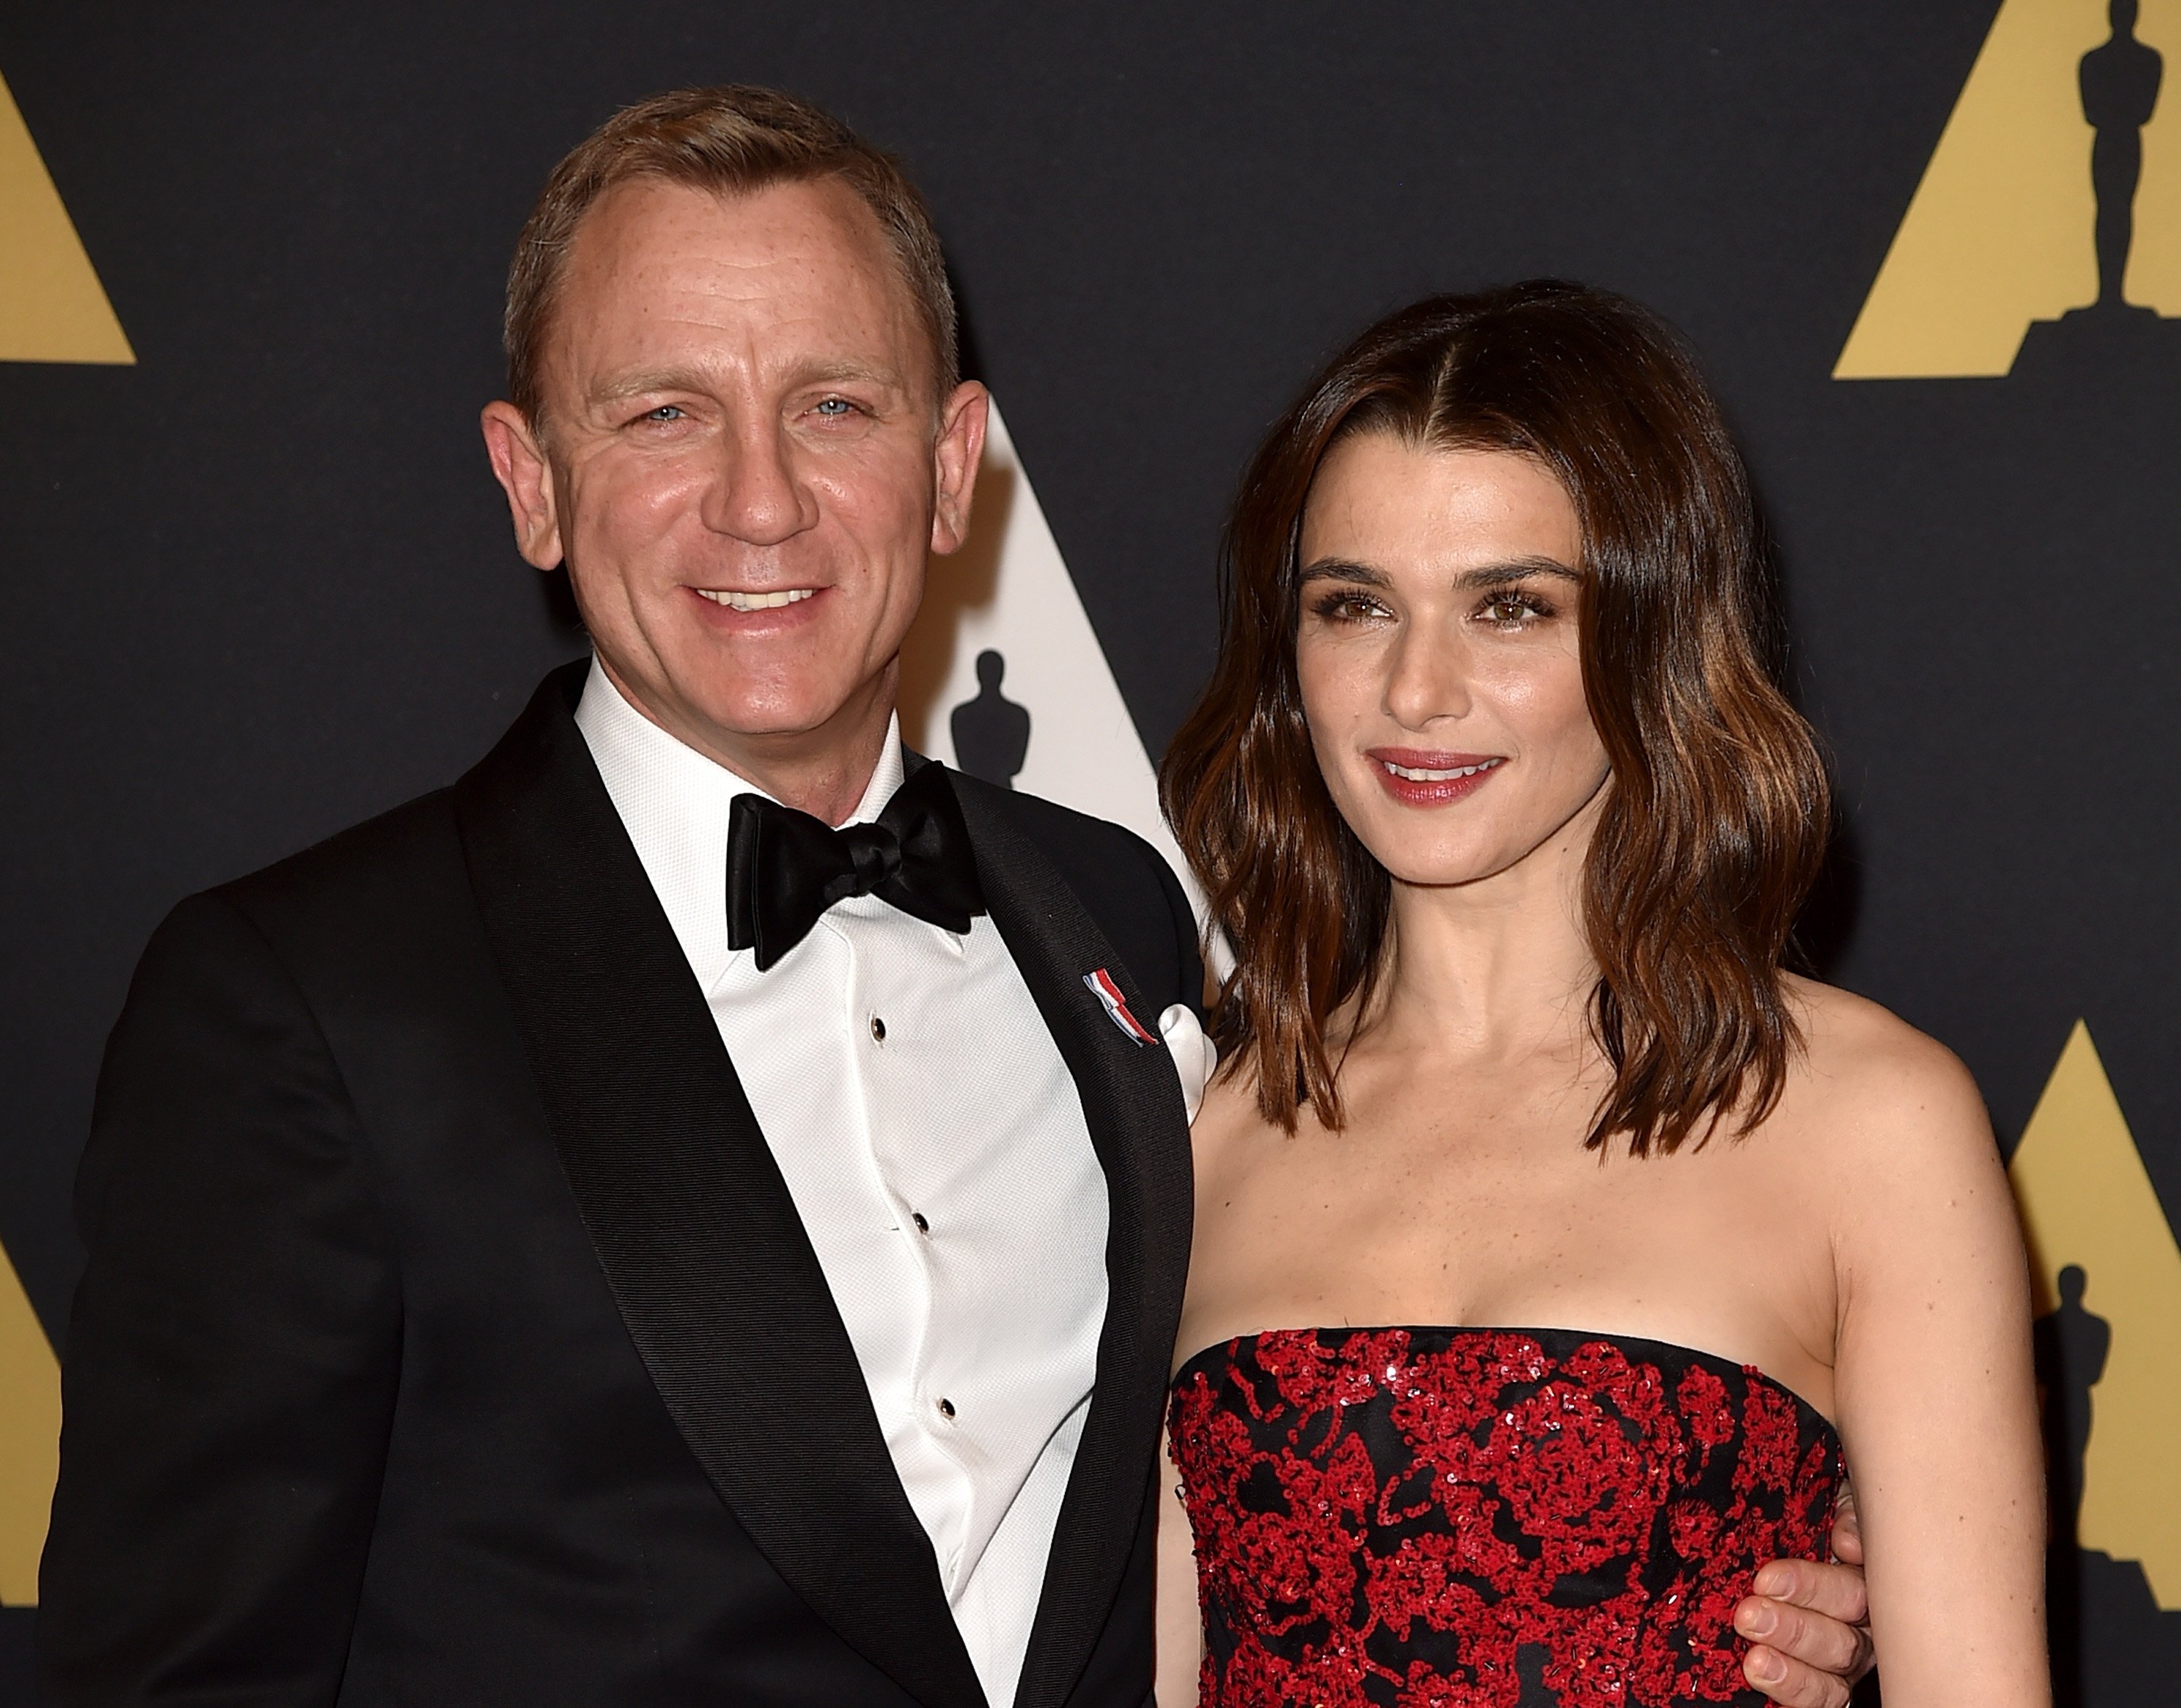 Actors Daniel Craig (L) and Rachel Weisz attend the Academy of Motion Picture Arts and Sciences' 7th annual Governors Awards at The Ray Dolby Ballroom at Hollywood & Highland Center on November 14, 2015 in Hollywood, California.| Source: Getty Images